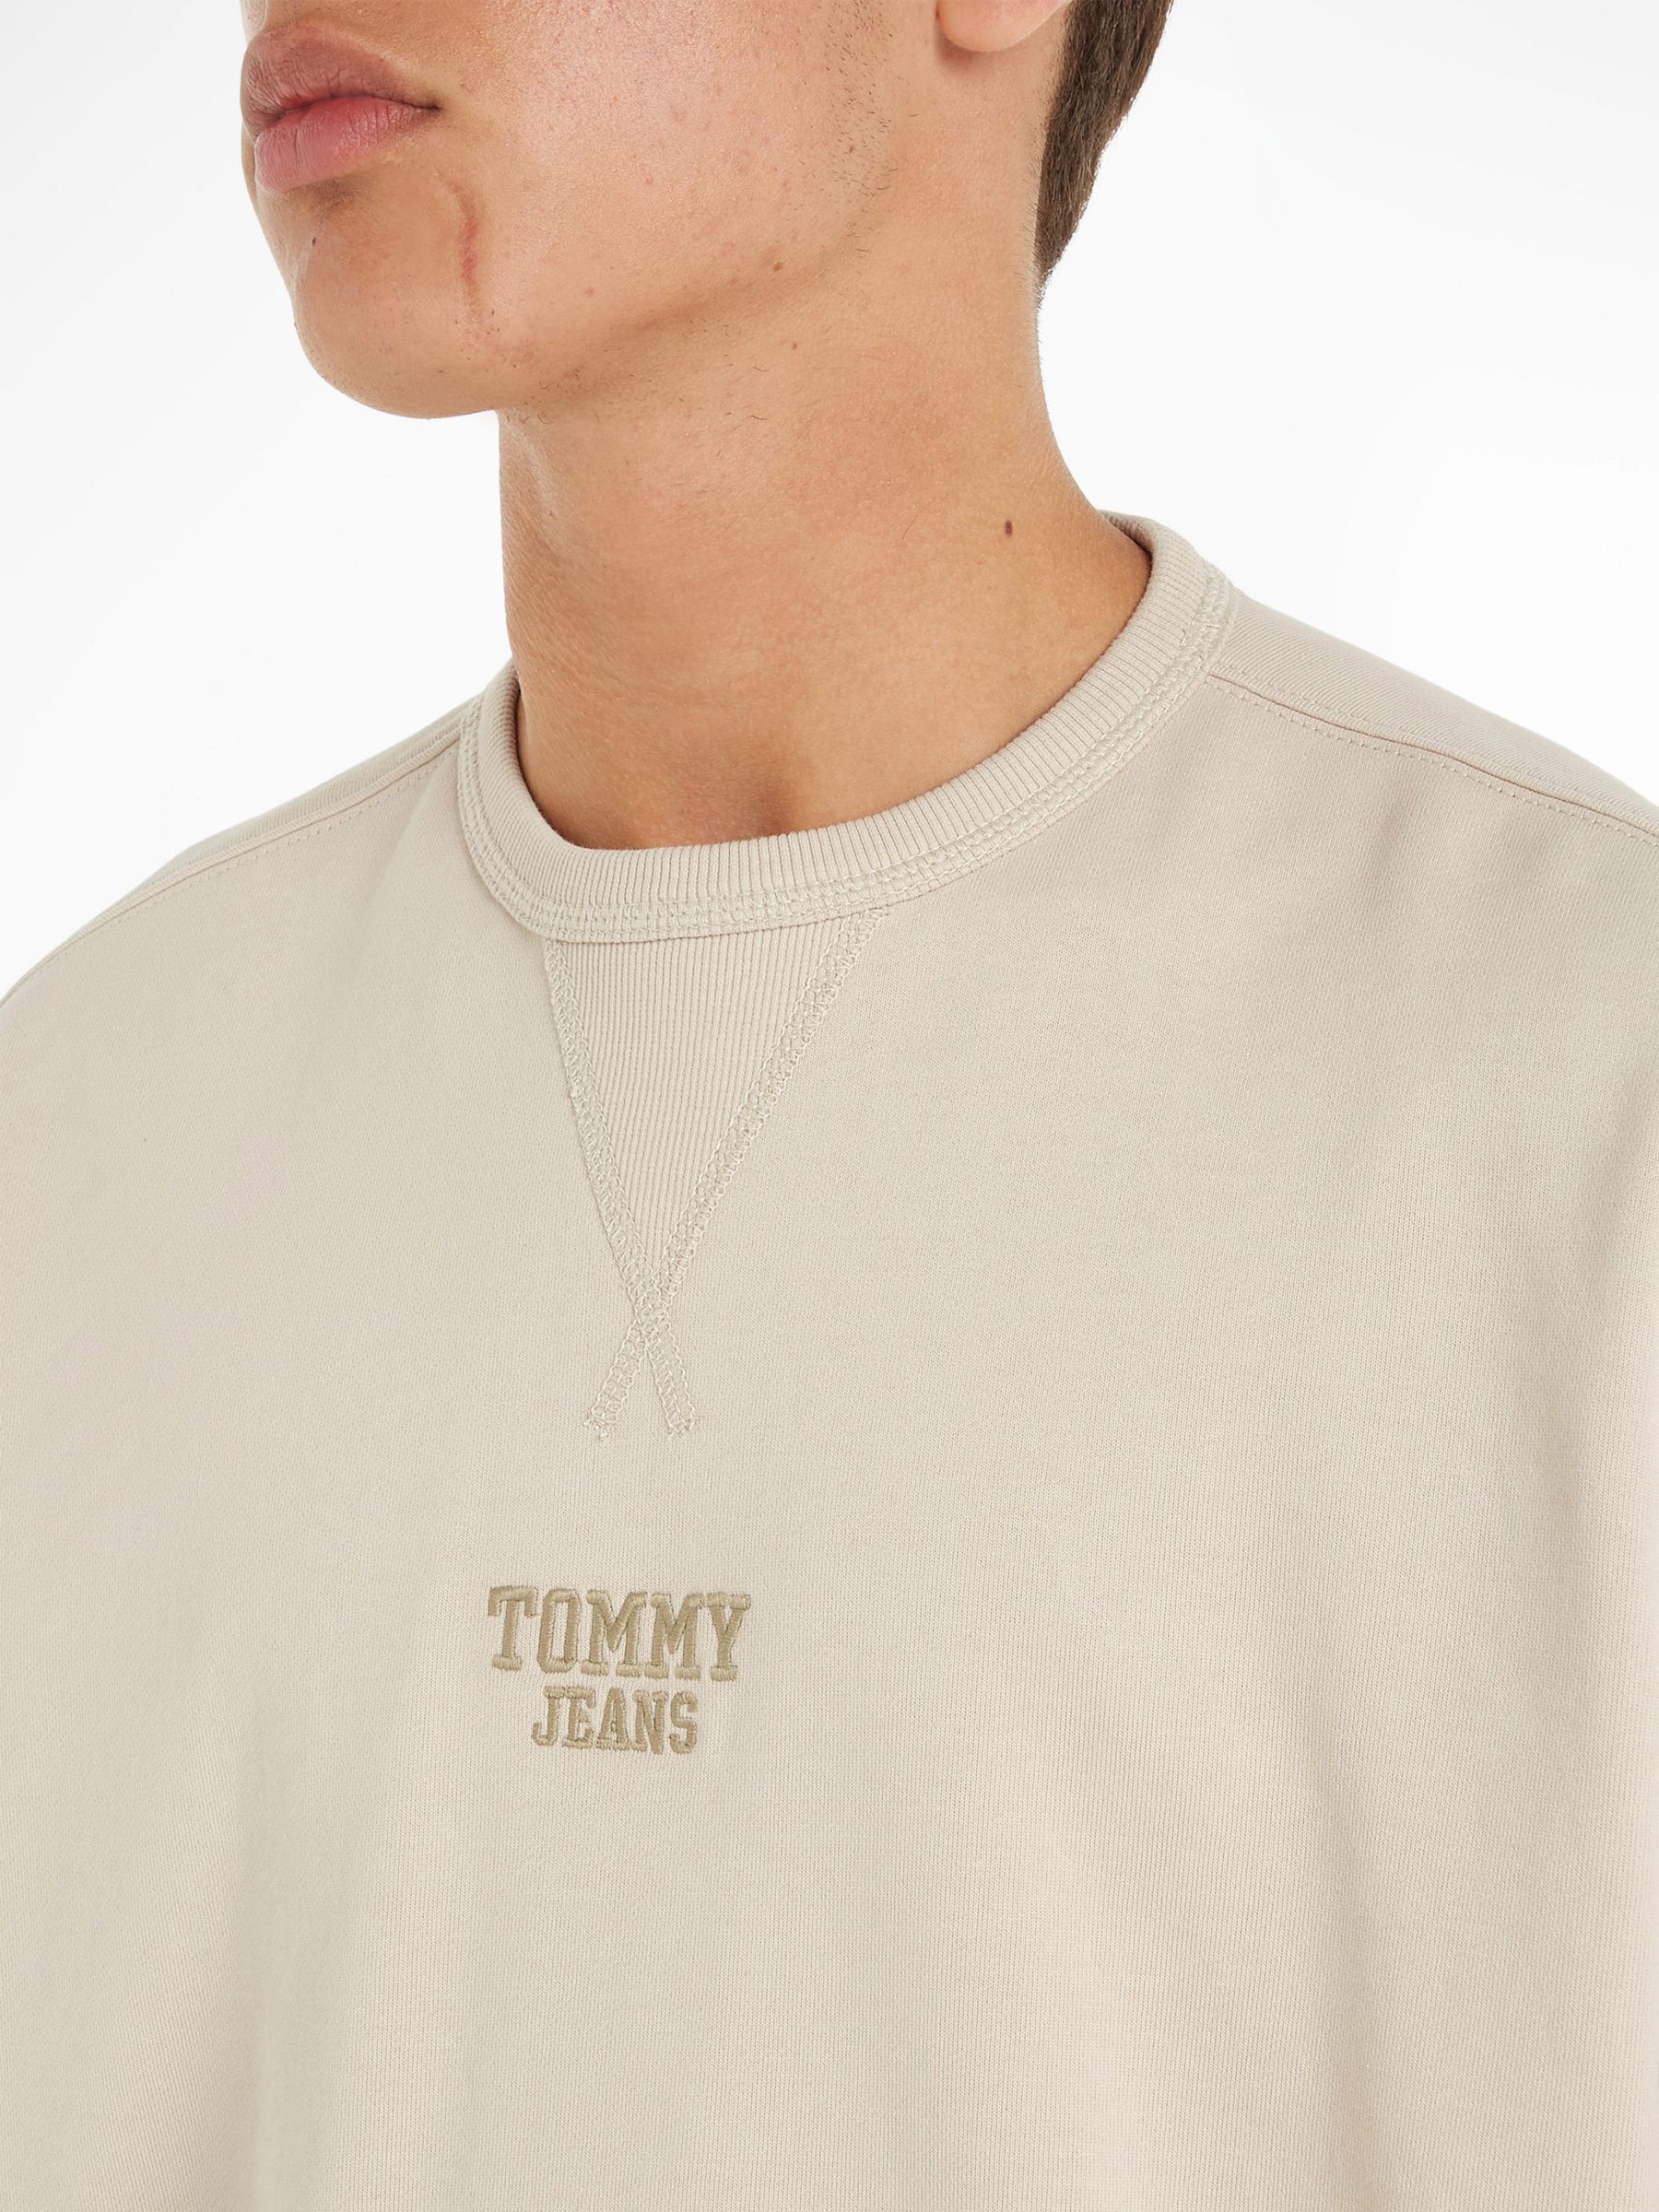 Buy Tommy Jeans Relaxed Logo Sweatshirt, Classic Beige Online at johnlewis.com